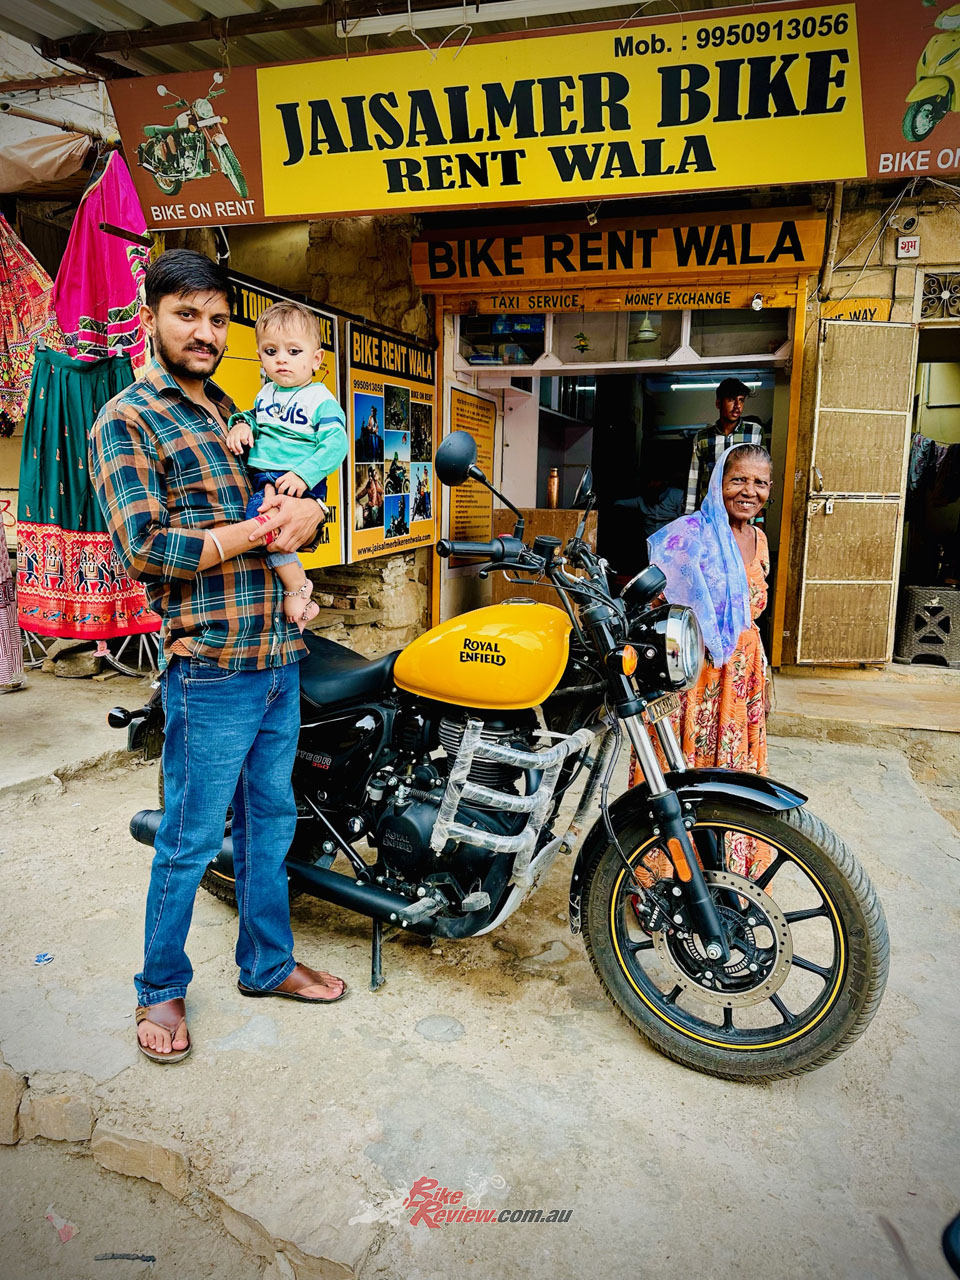 There are plenty of bike rental companies scattered across India, most opting for the usage of Royal Enfield's.